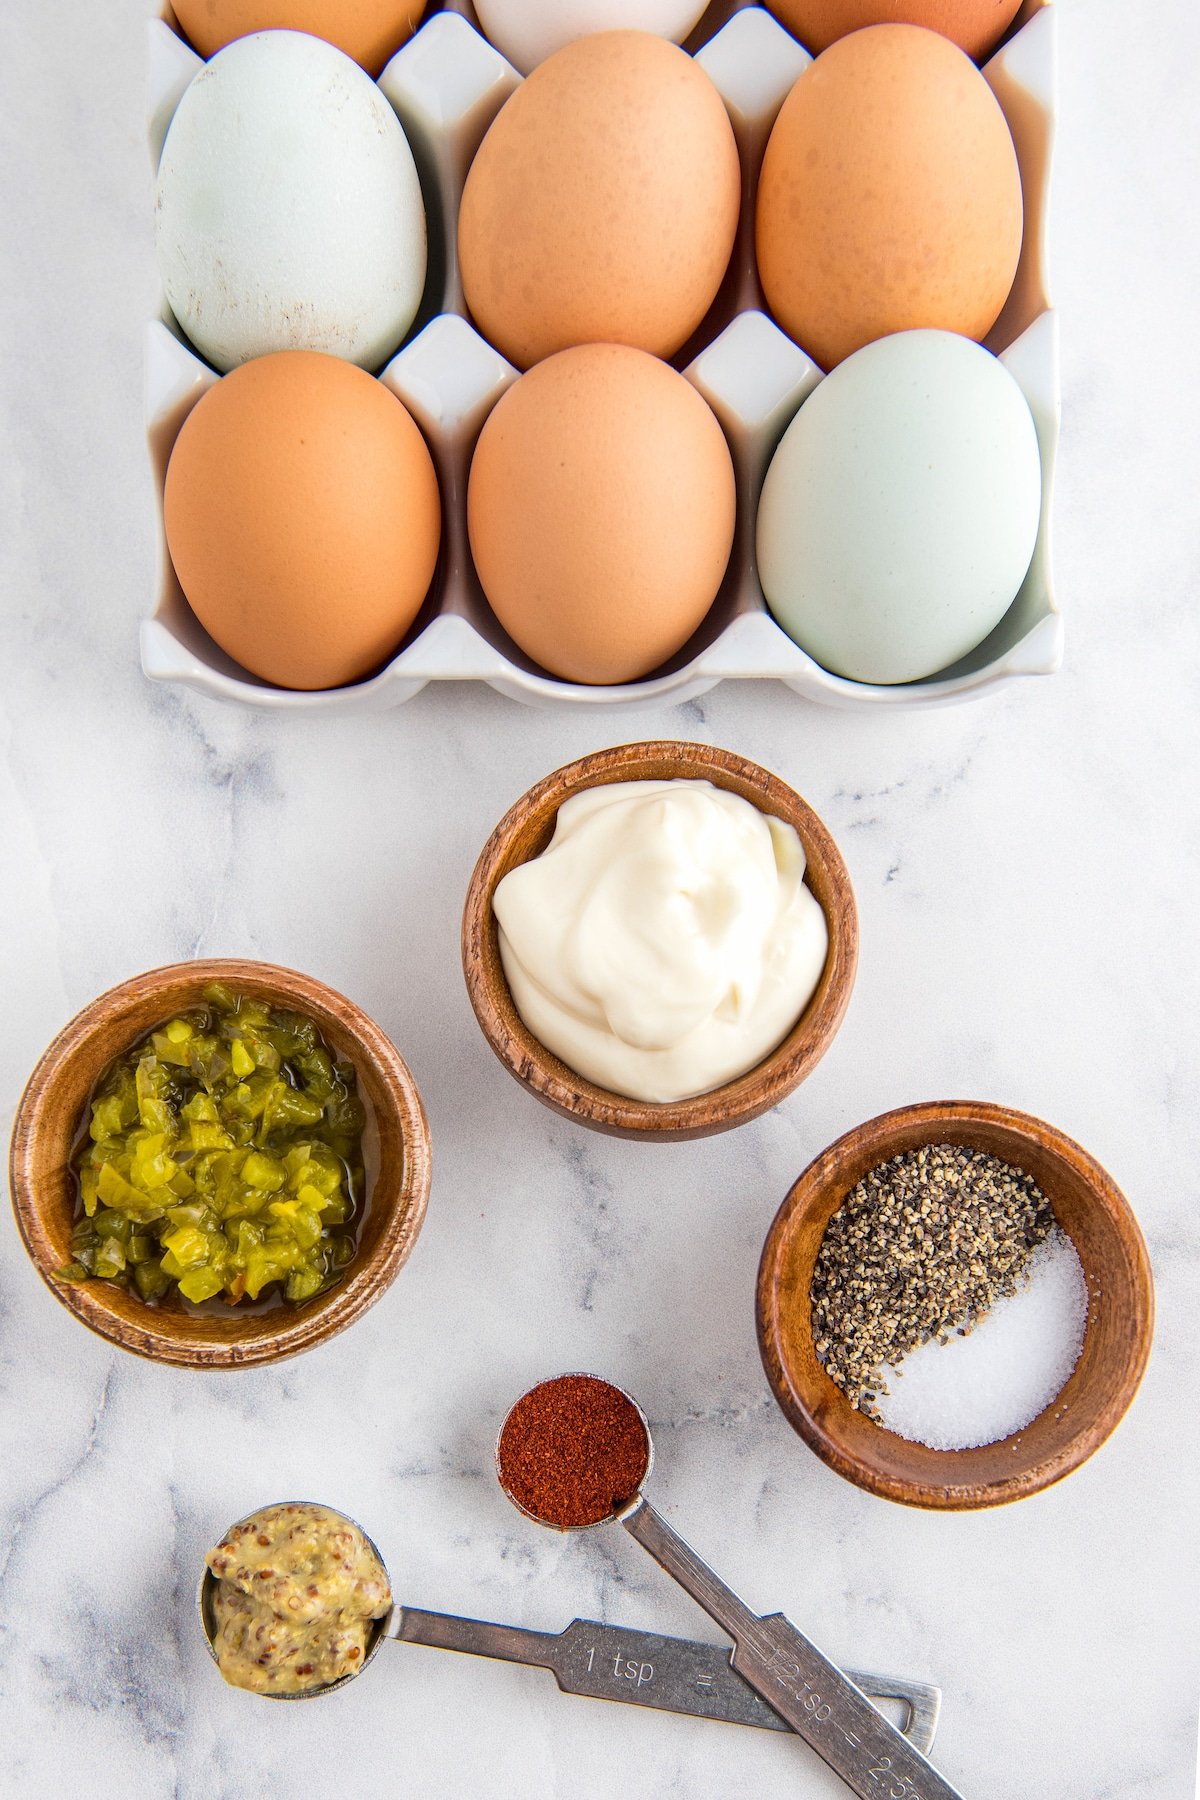 Eggs in an egg carton and other ingredients arranged in wooden bowls.